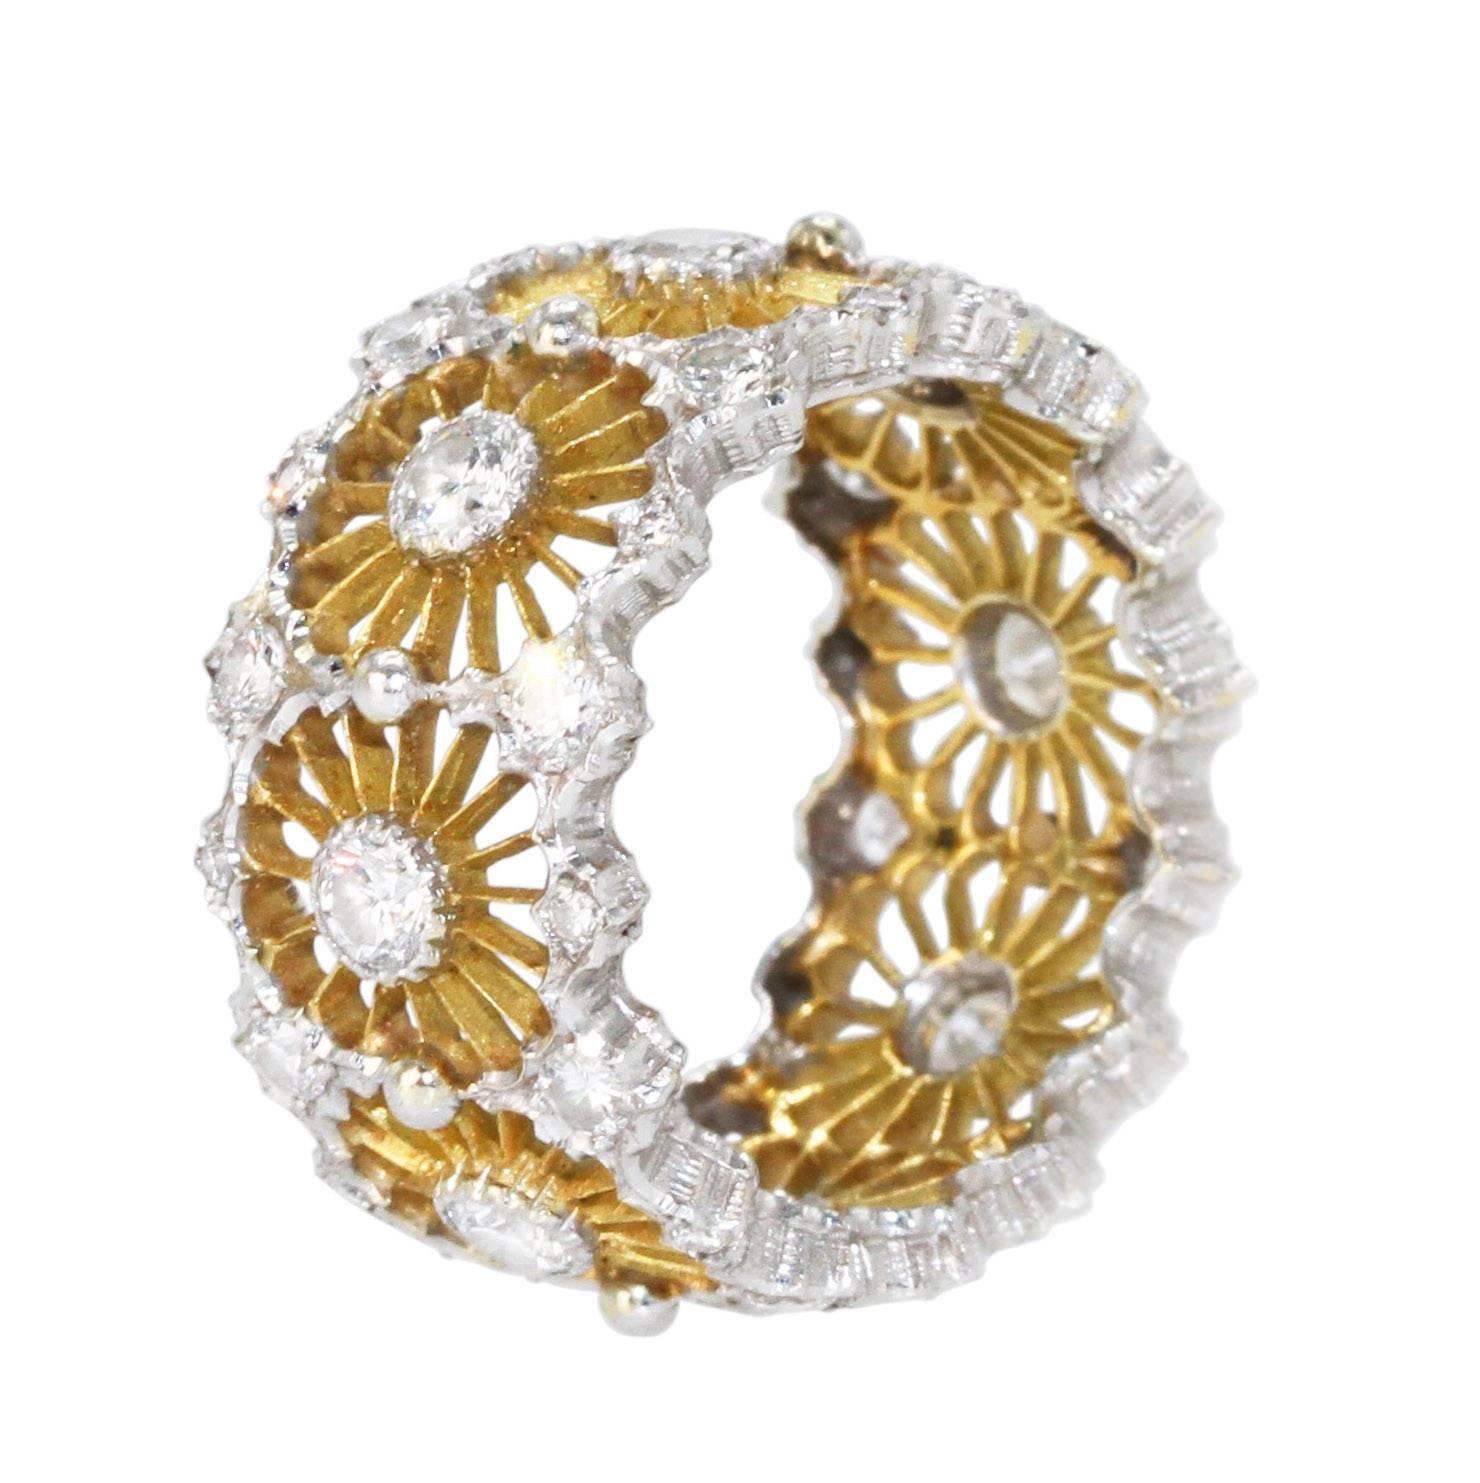 An 18 karat white and yellow gold and diamond band ring by Buccellati, Italy, of openwork design set with 40 round diamonds weighing approximately 1.50 carats, gross weight 6.0 grams, size 6, signed Buccellati, Italy.                        